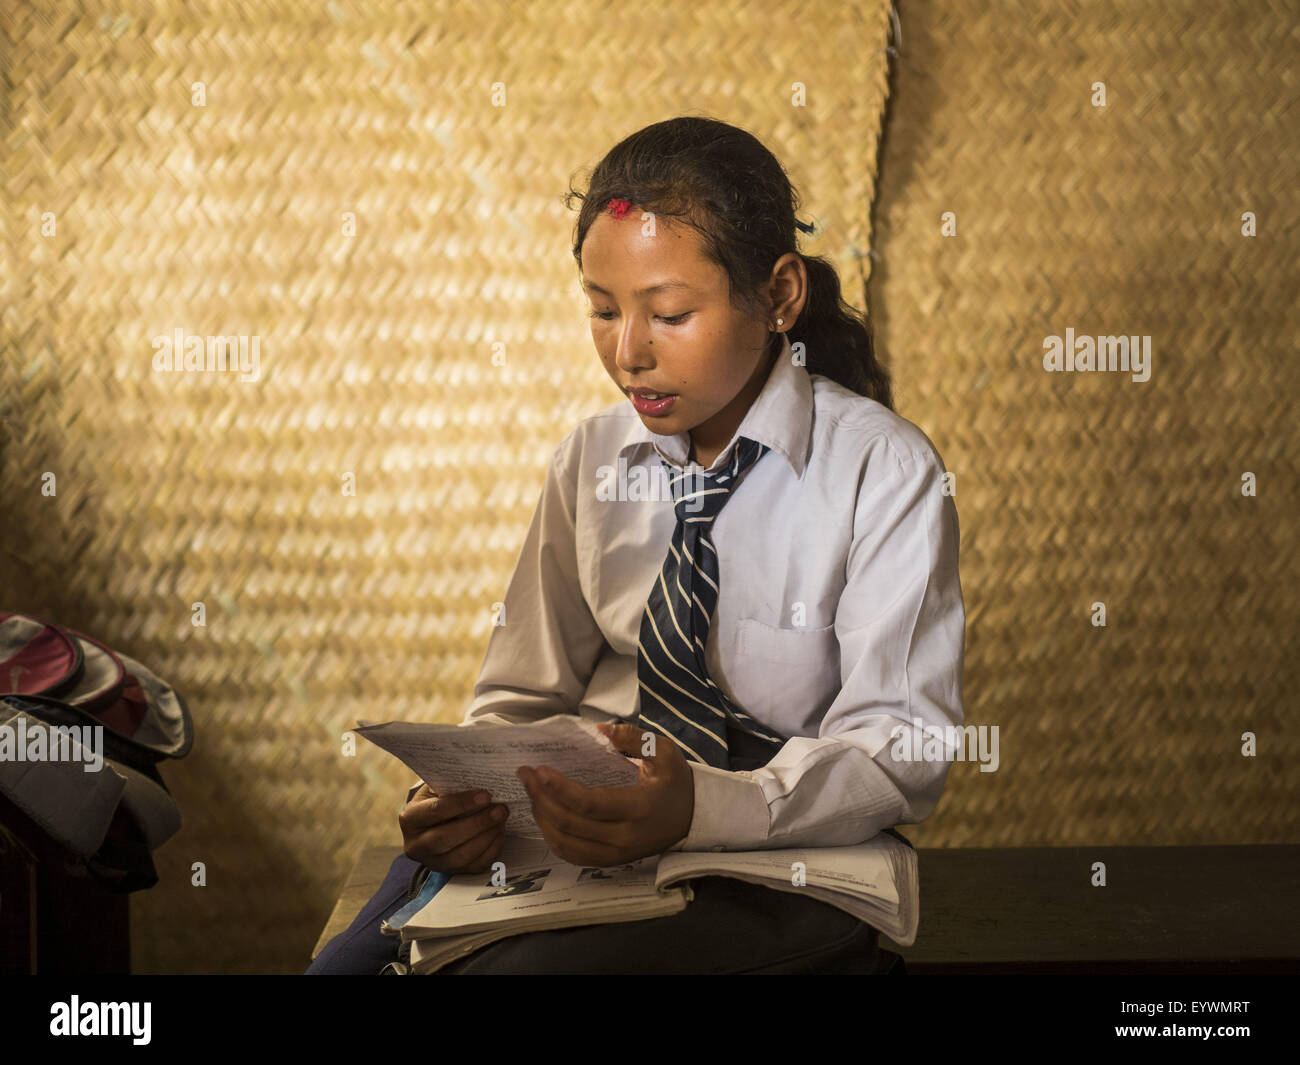 Bhaktapur, Nepal. 2nd Aug, 2015. A student at Sharada Higher Secondary School in Bhaktapur studies in a temporary classroom made out of woven mats before an exam. About half of the school was destroyed in the earthquake that struck in April 2015. The school is being rebuilt by the staff in their spare time. The Nepal Earthquake on April 25, 2015, (also known as the Gorkha earthquake) killed more than 9,000 people and injured more than 23,000. It had a magnitude of 7.8. The epicenter was east of the district of Lamjung, and its hypocenter was at a depth of approximately 15Â km (9.3Â mi). It wa Stock Photo